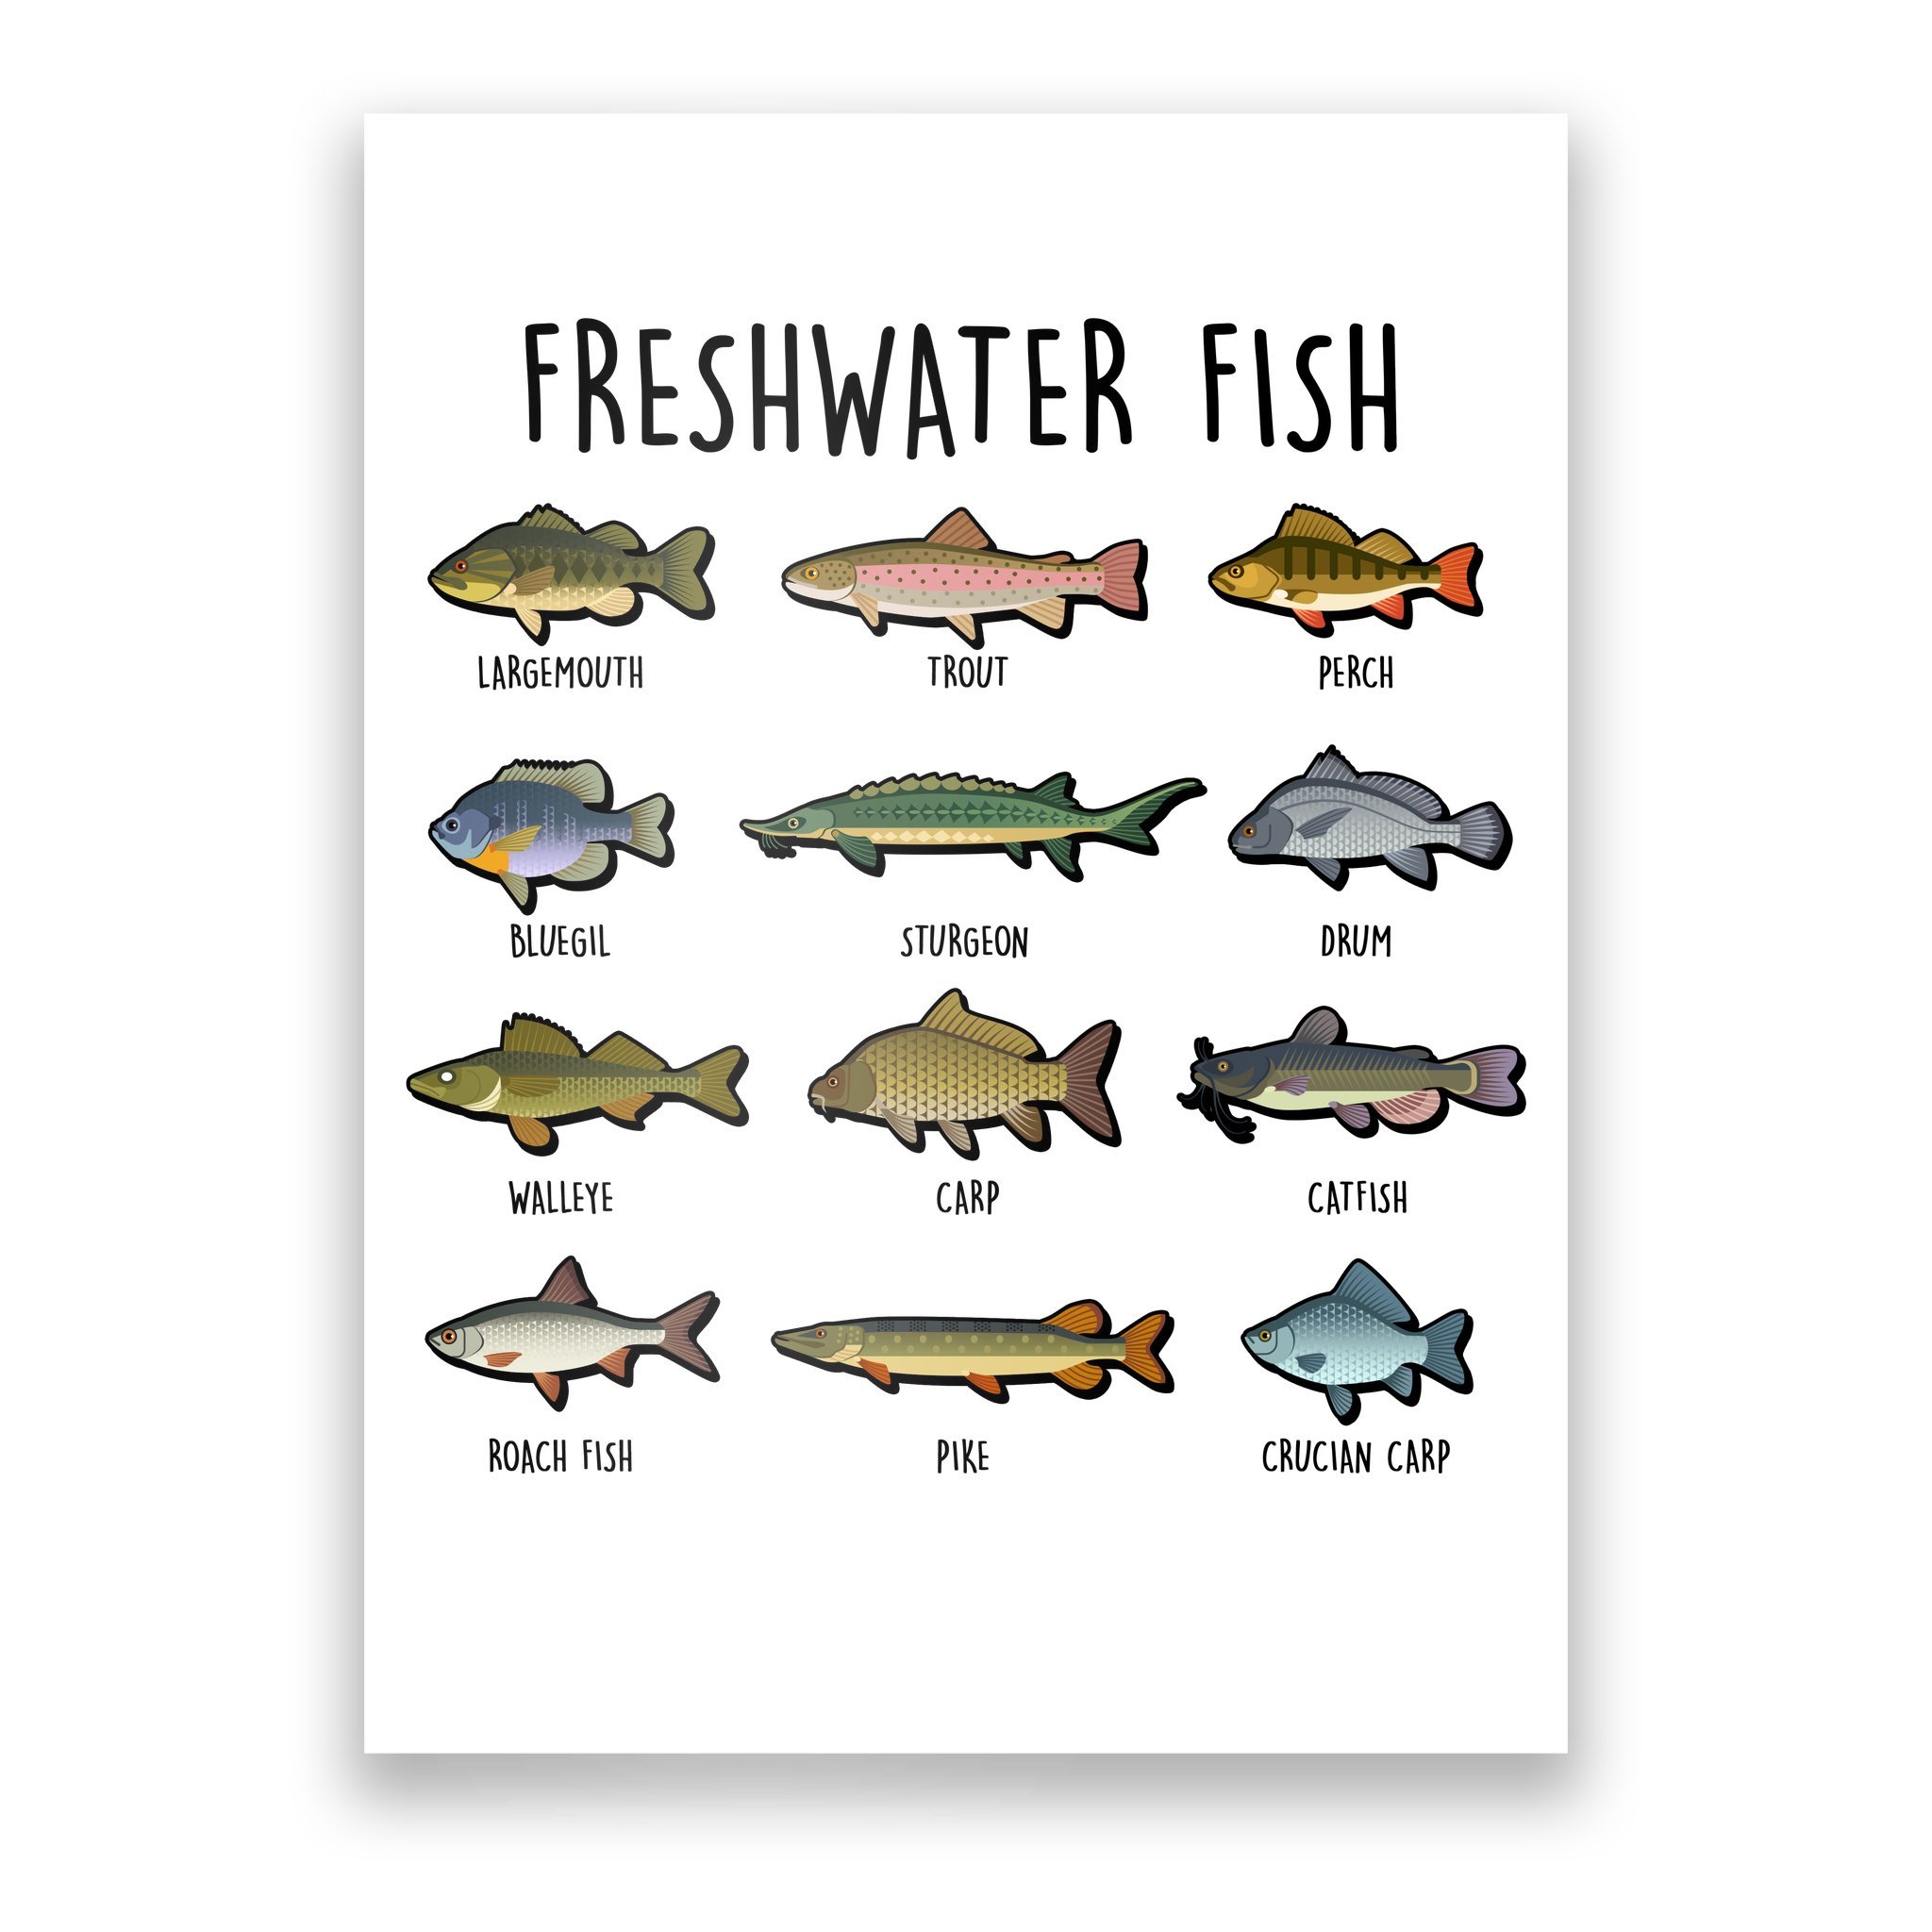 Freshwater Fish - 100 Different Types Poster